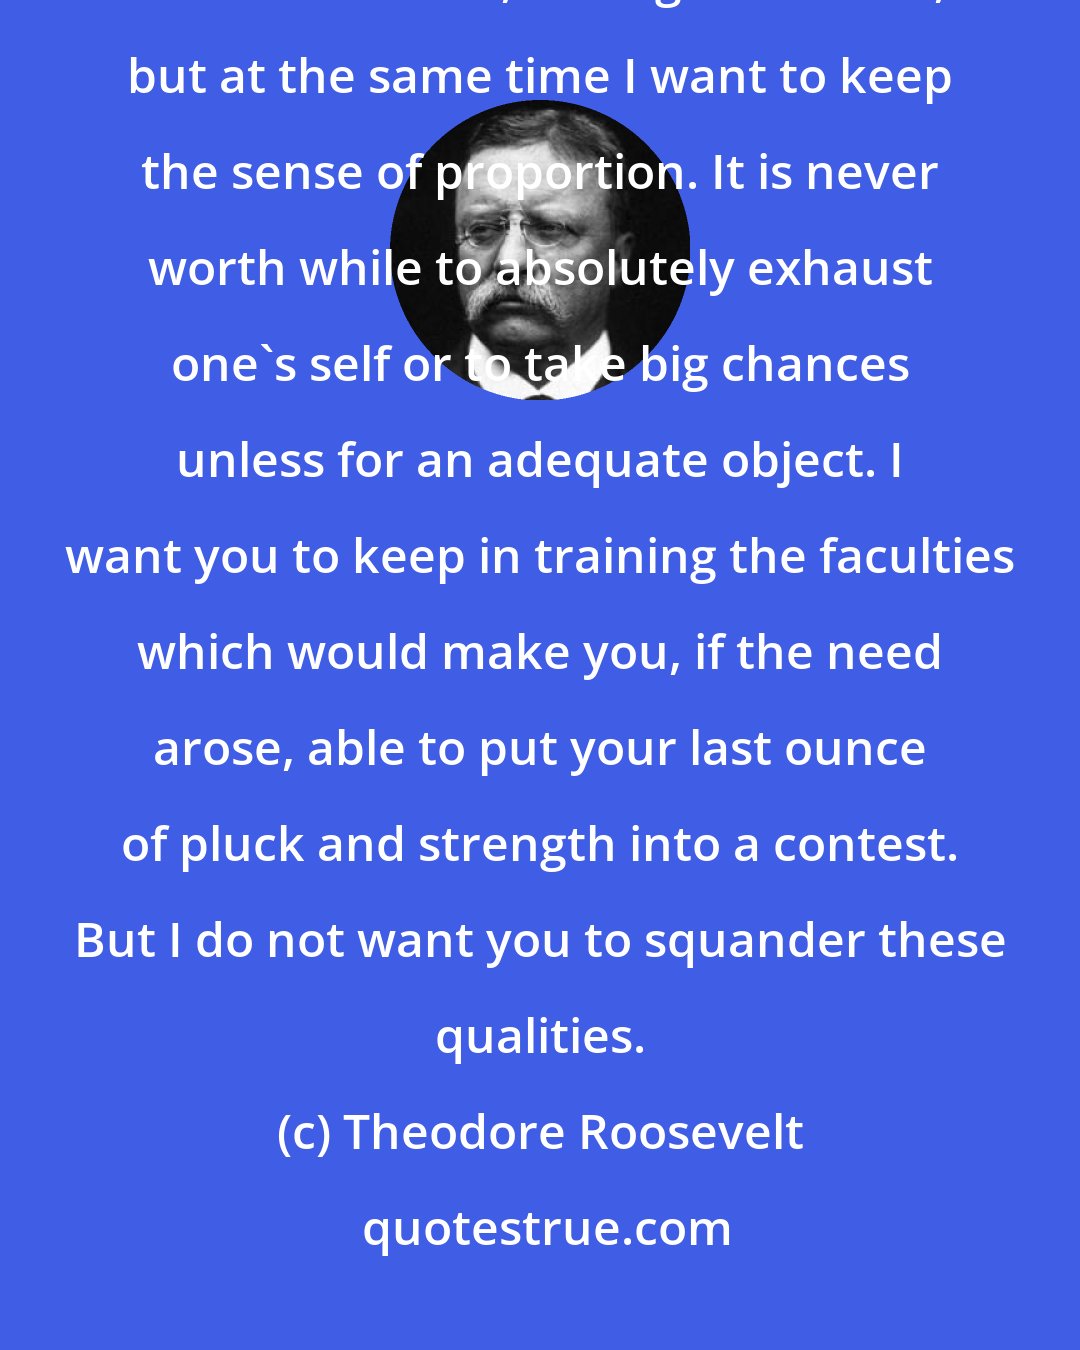 Theodore Roosevelt: I always believe in going hard at everything, whether it is Latin or mathematics, boxing or football, but at the same time I want to keep the sense of proportion. It is never worth while to absolutely exhaust one's self or to take big chances unless for an adequate object. I want you to keep in training the faculties which would make you, if the need arose, able to put your last ounce of pluck and strength into a contest. But I do not want you to squander these qualities.